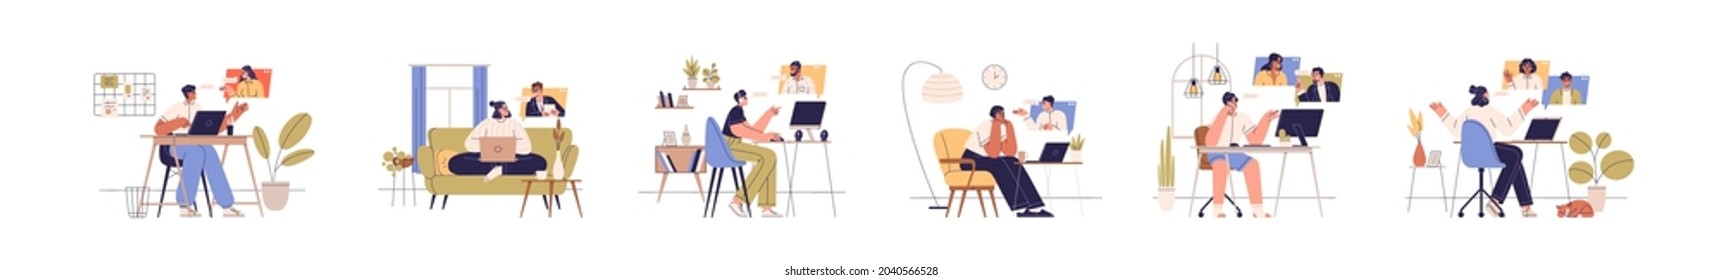 People With Computers During Online Business Communication At Remote Work. Set Of Man And Woman With Laptops At Virtual Video Conference Calls. Flat Vector Illustration Isolated On White Background